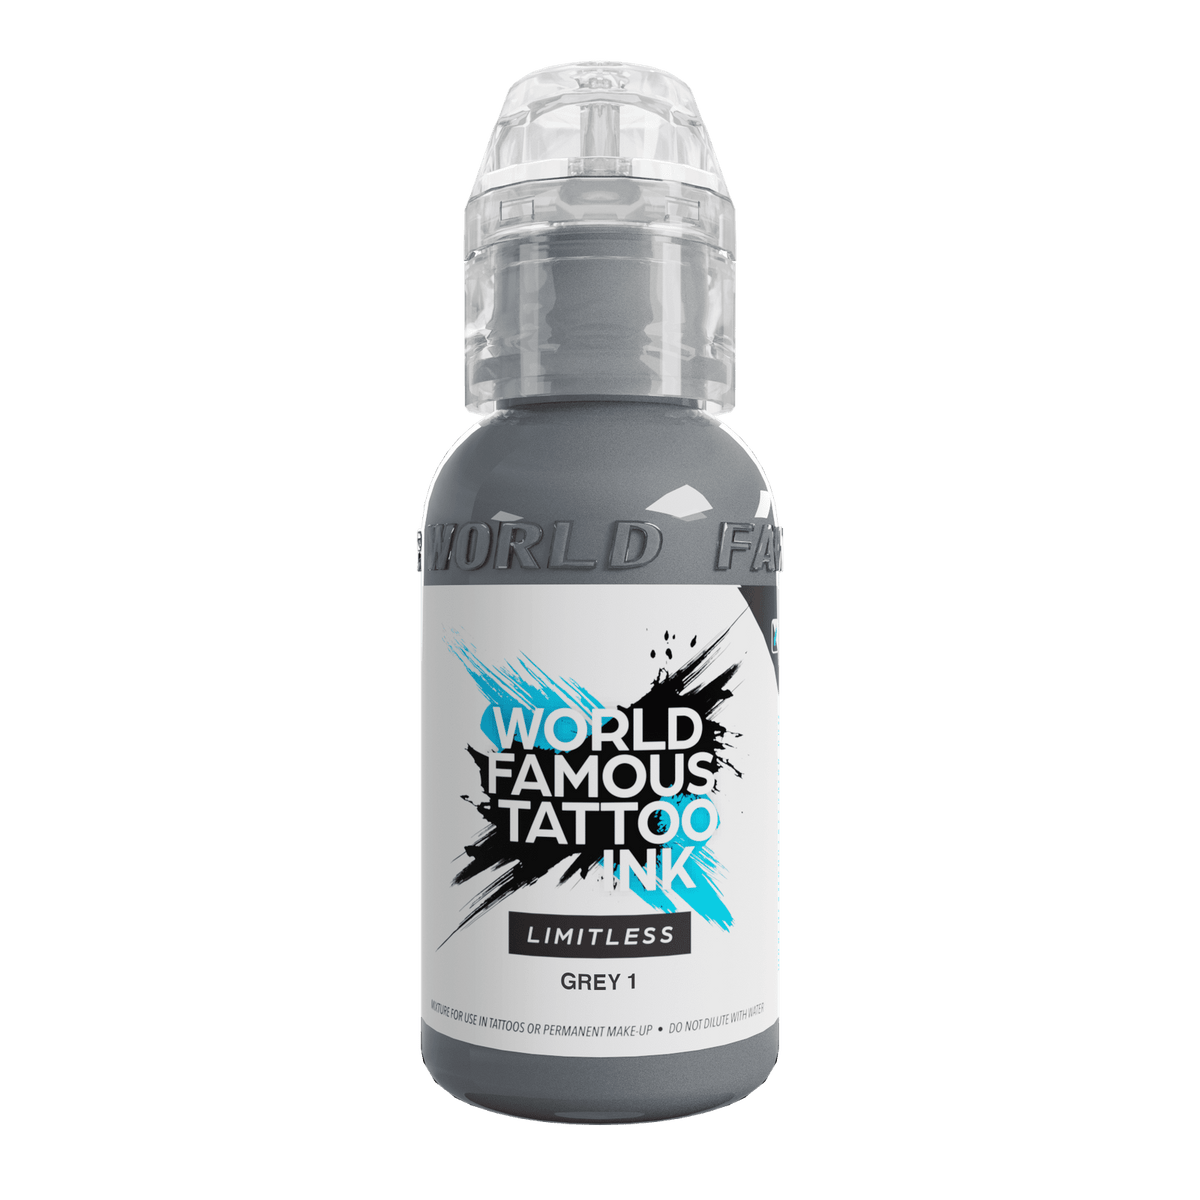 World Famous Tattoo Ink Limitless Grey 1